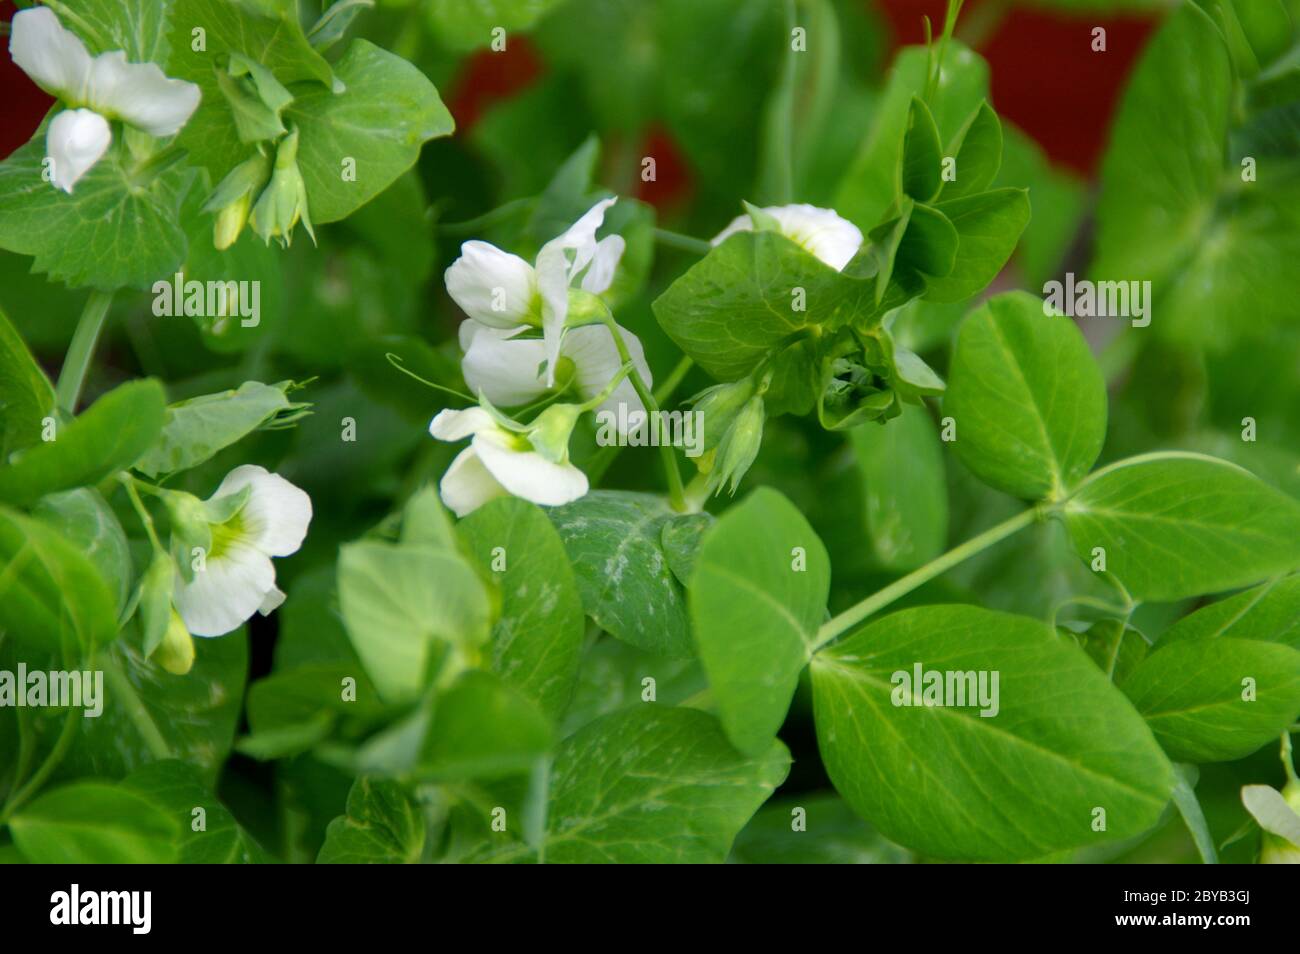 Leaves and flowers of green peas in the home garden. Flowering plants in spring. Stock Photo